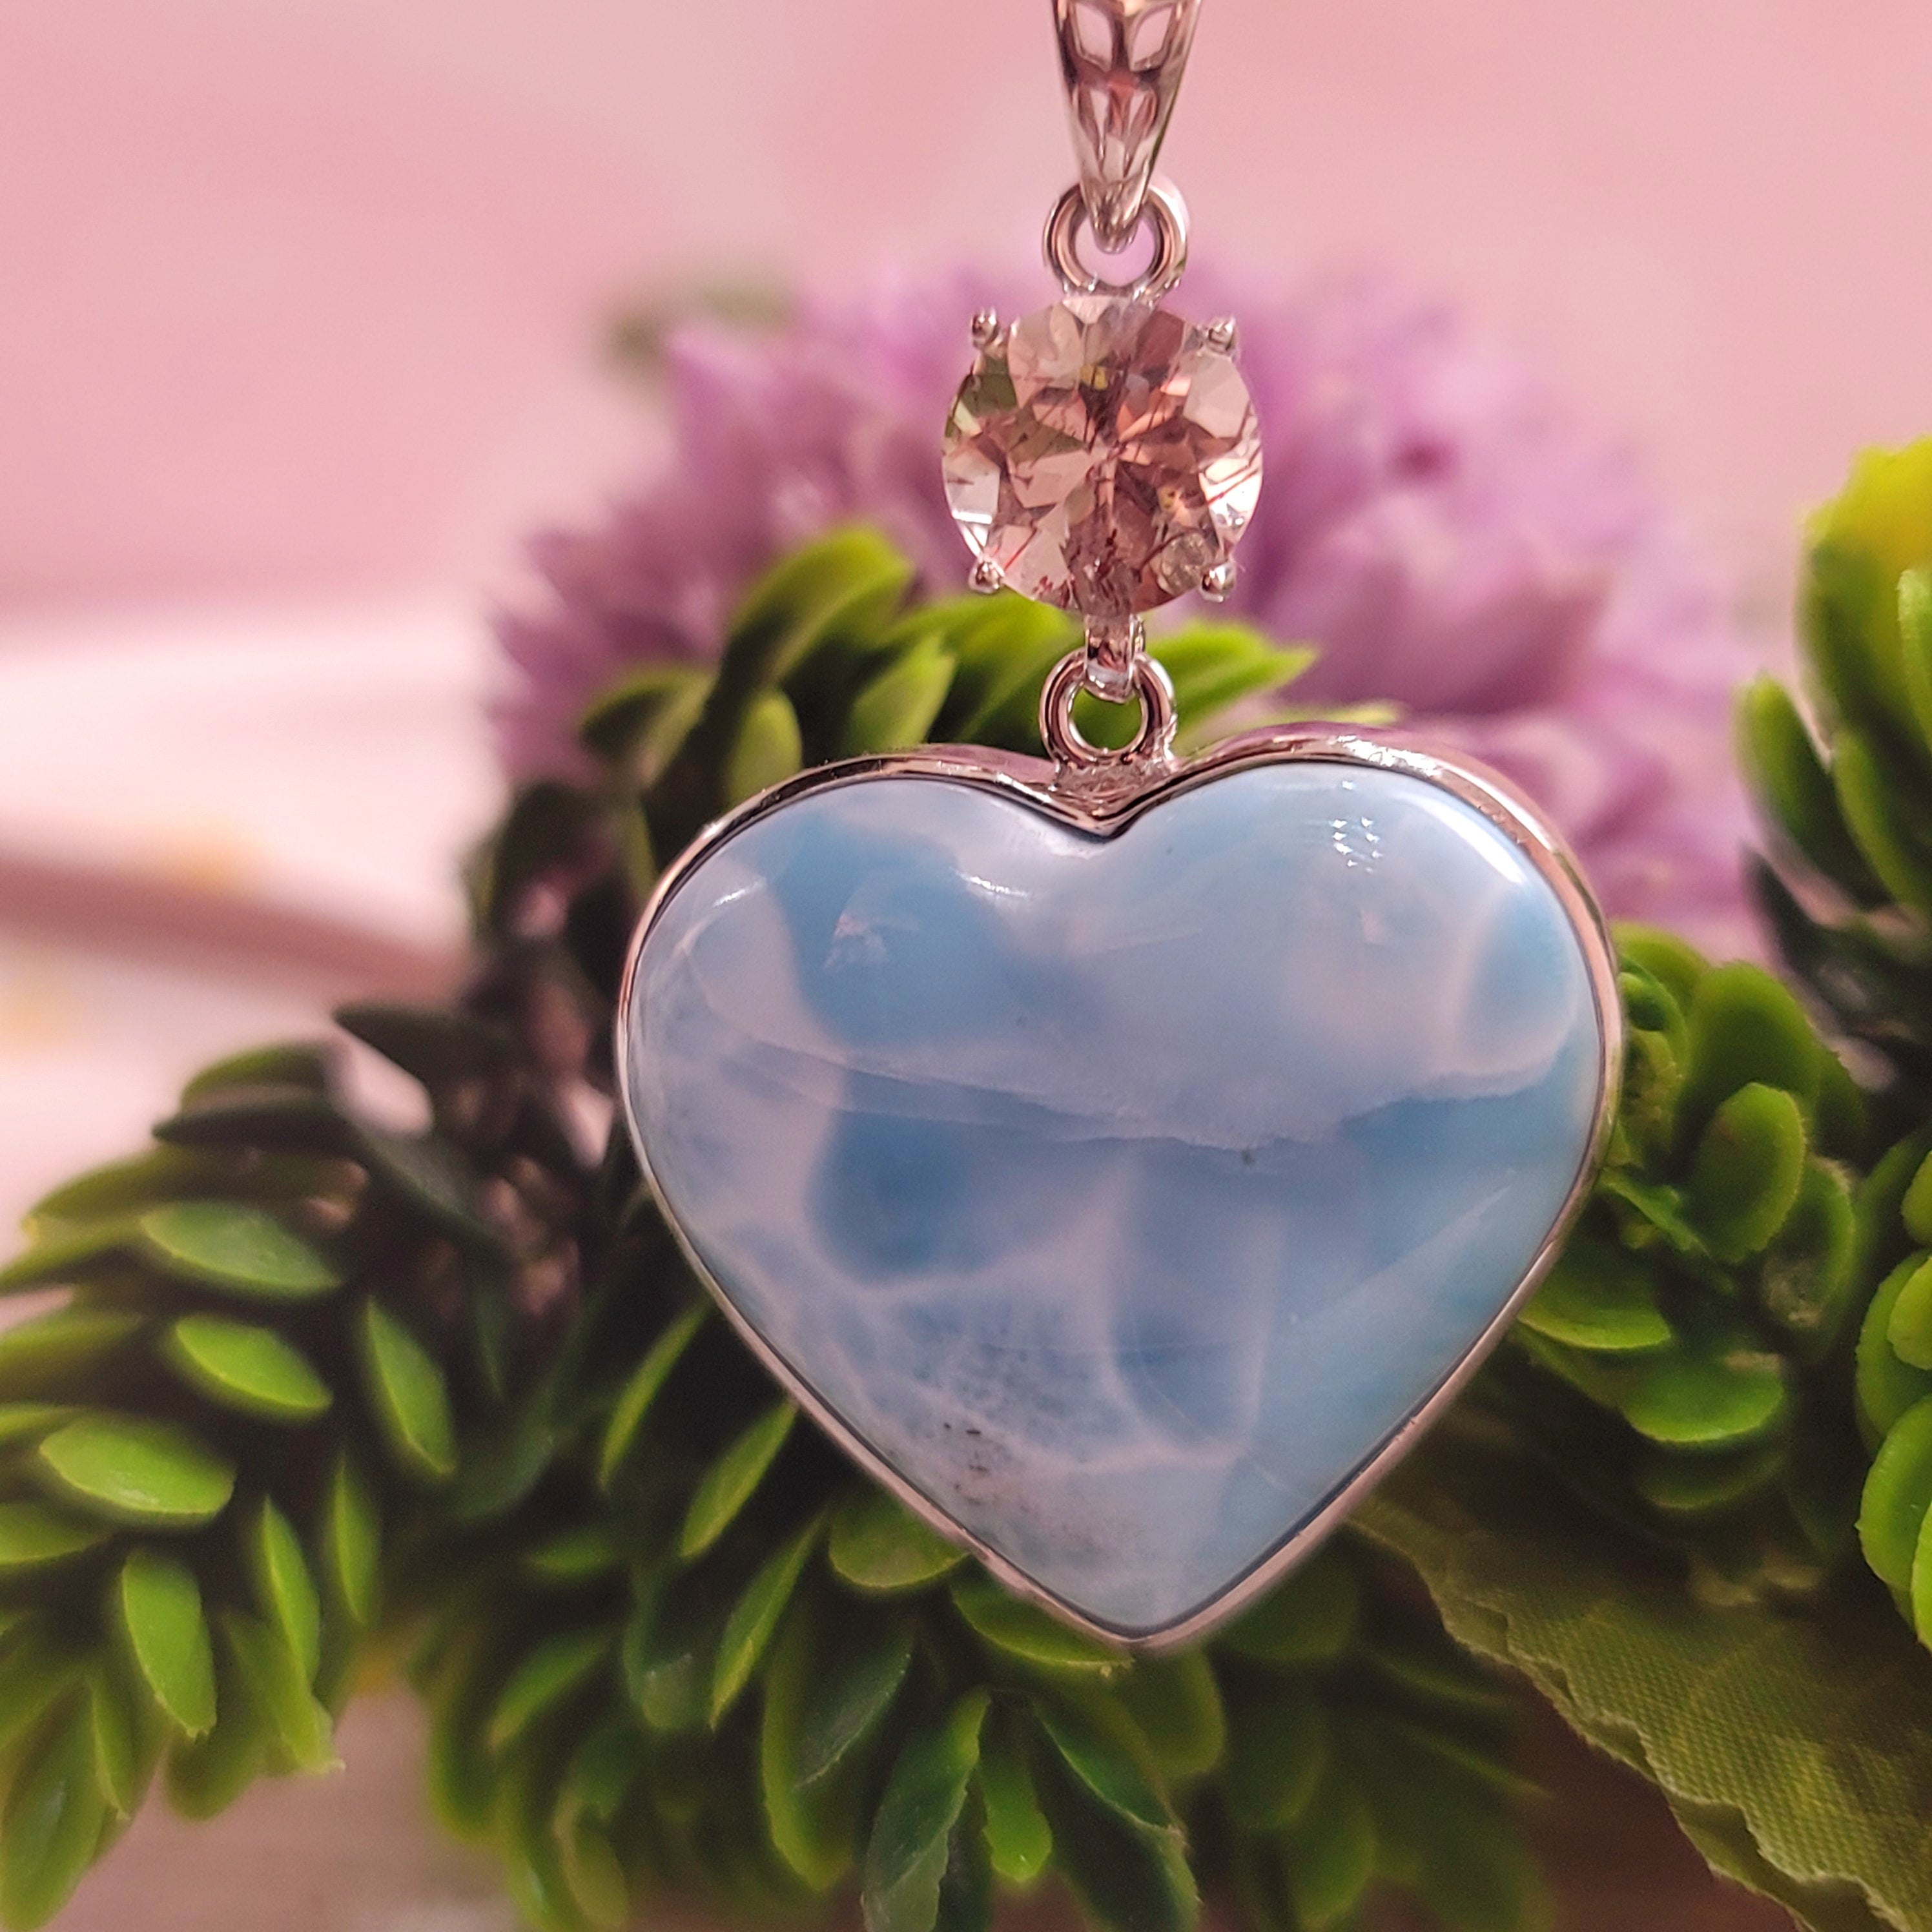 Larimar Heart and Pink Fire Quartz Necklace for Peace and Activation of your Psychic Abilities